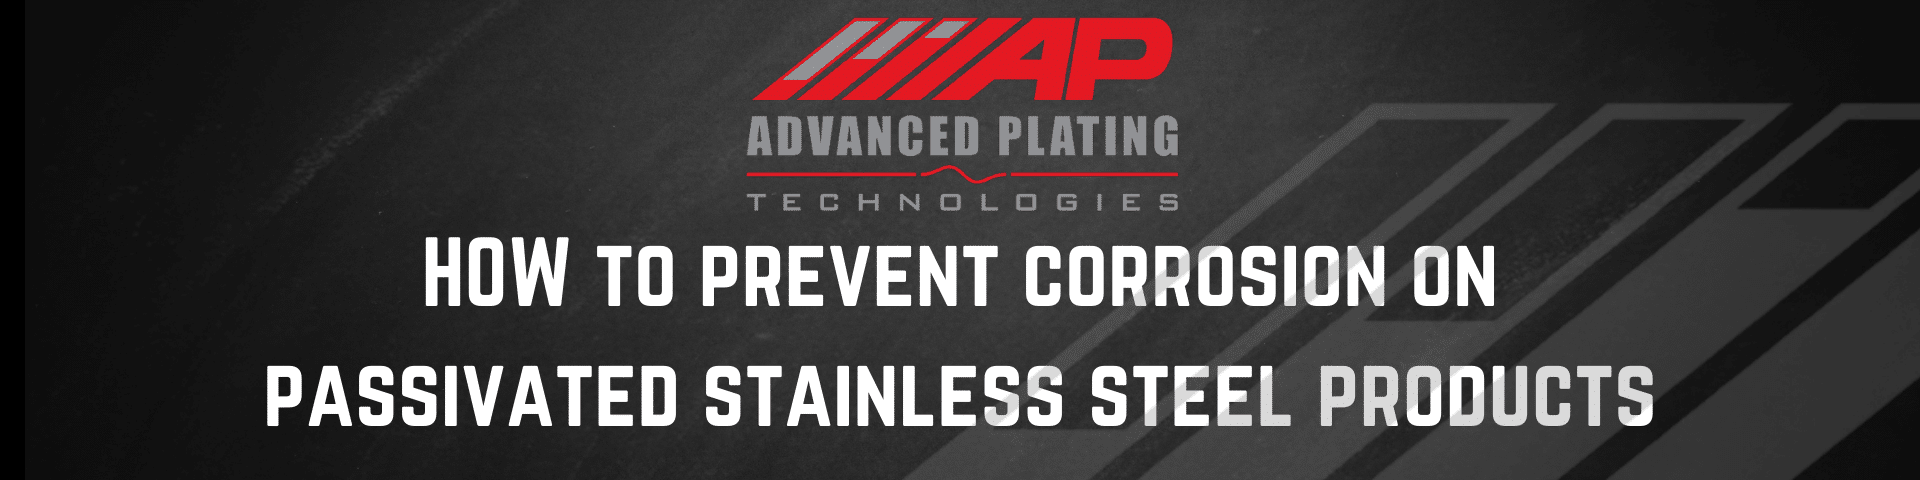 How to prevent corrosion on passivated stainless steel products